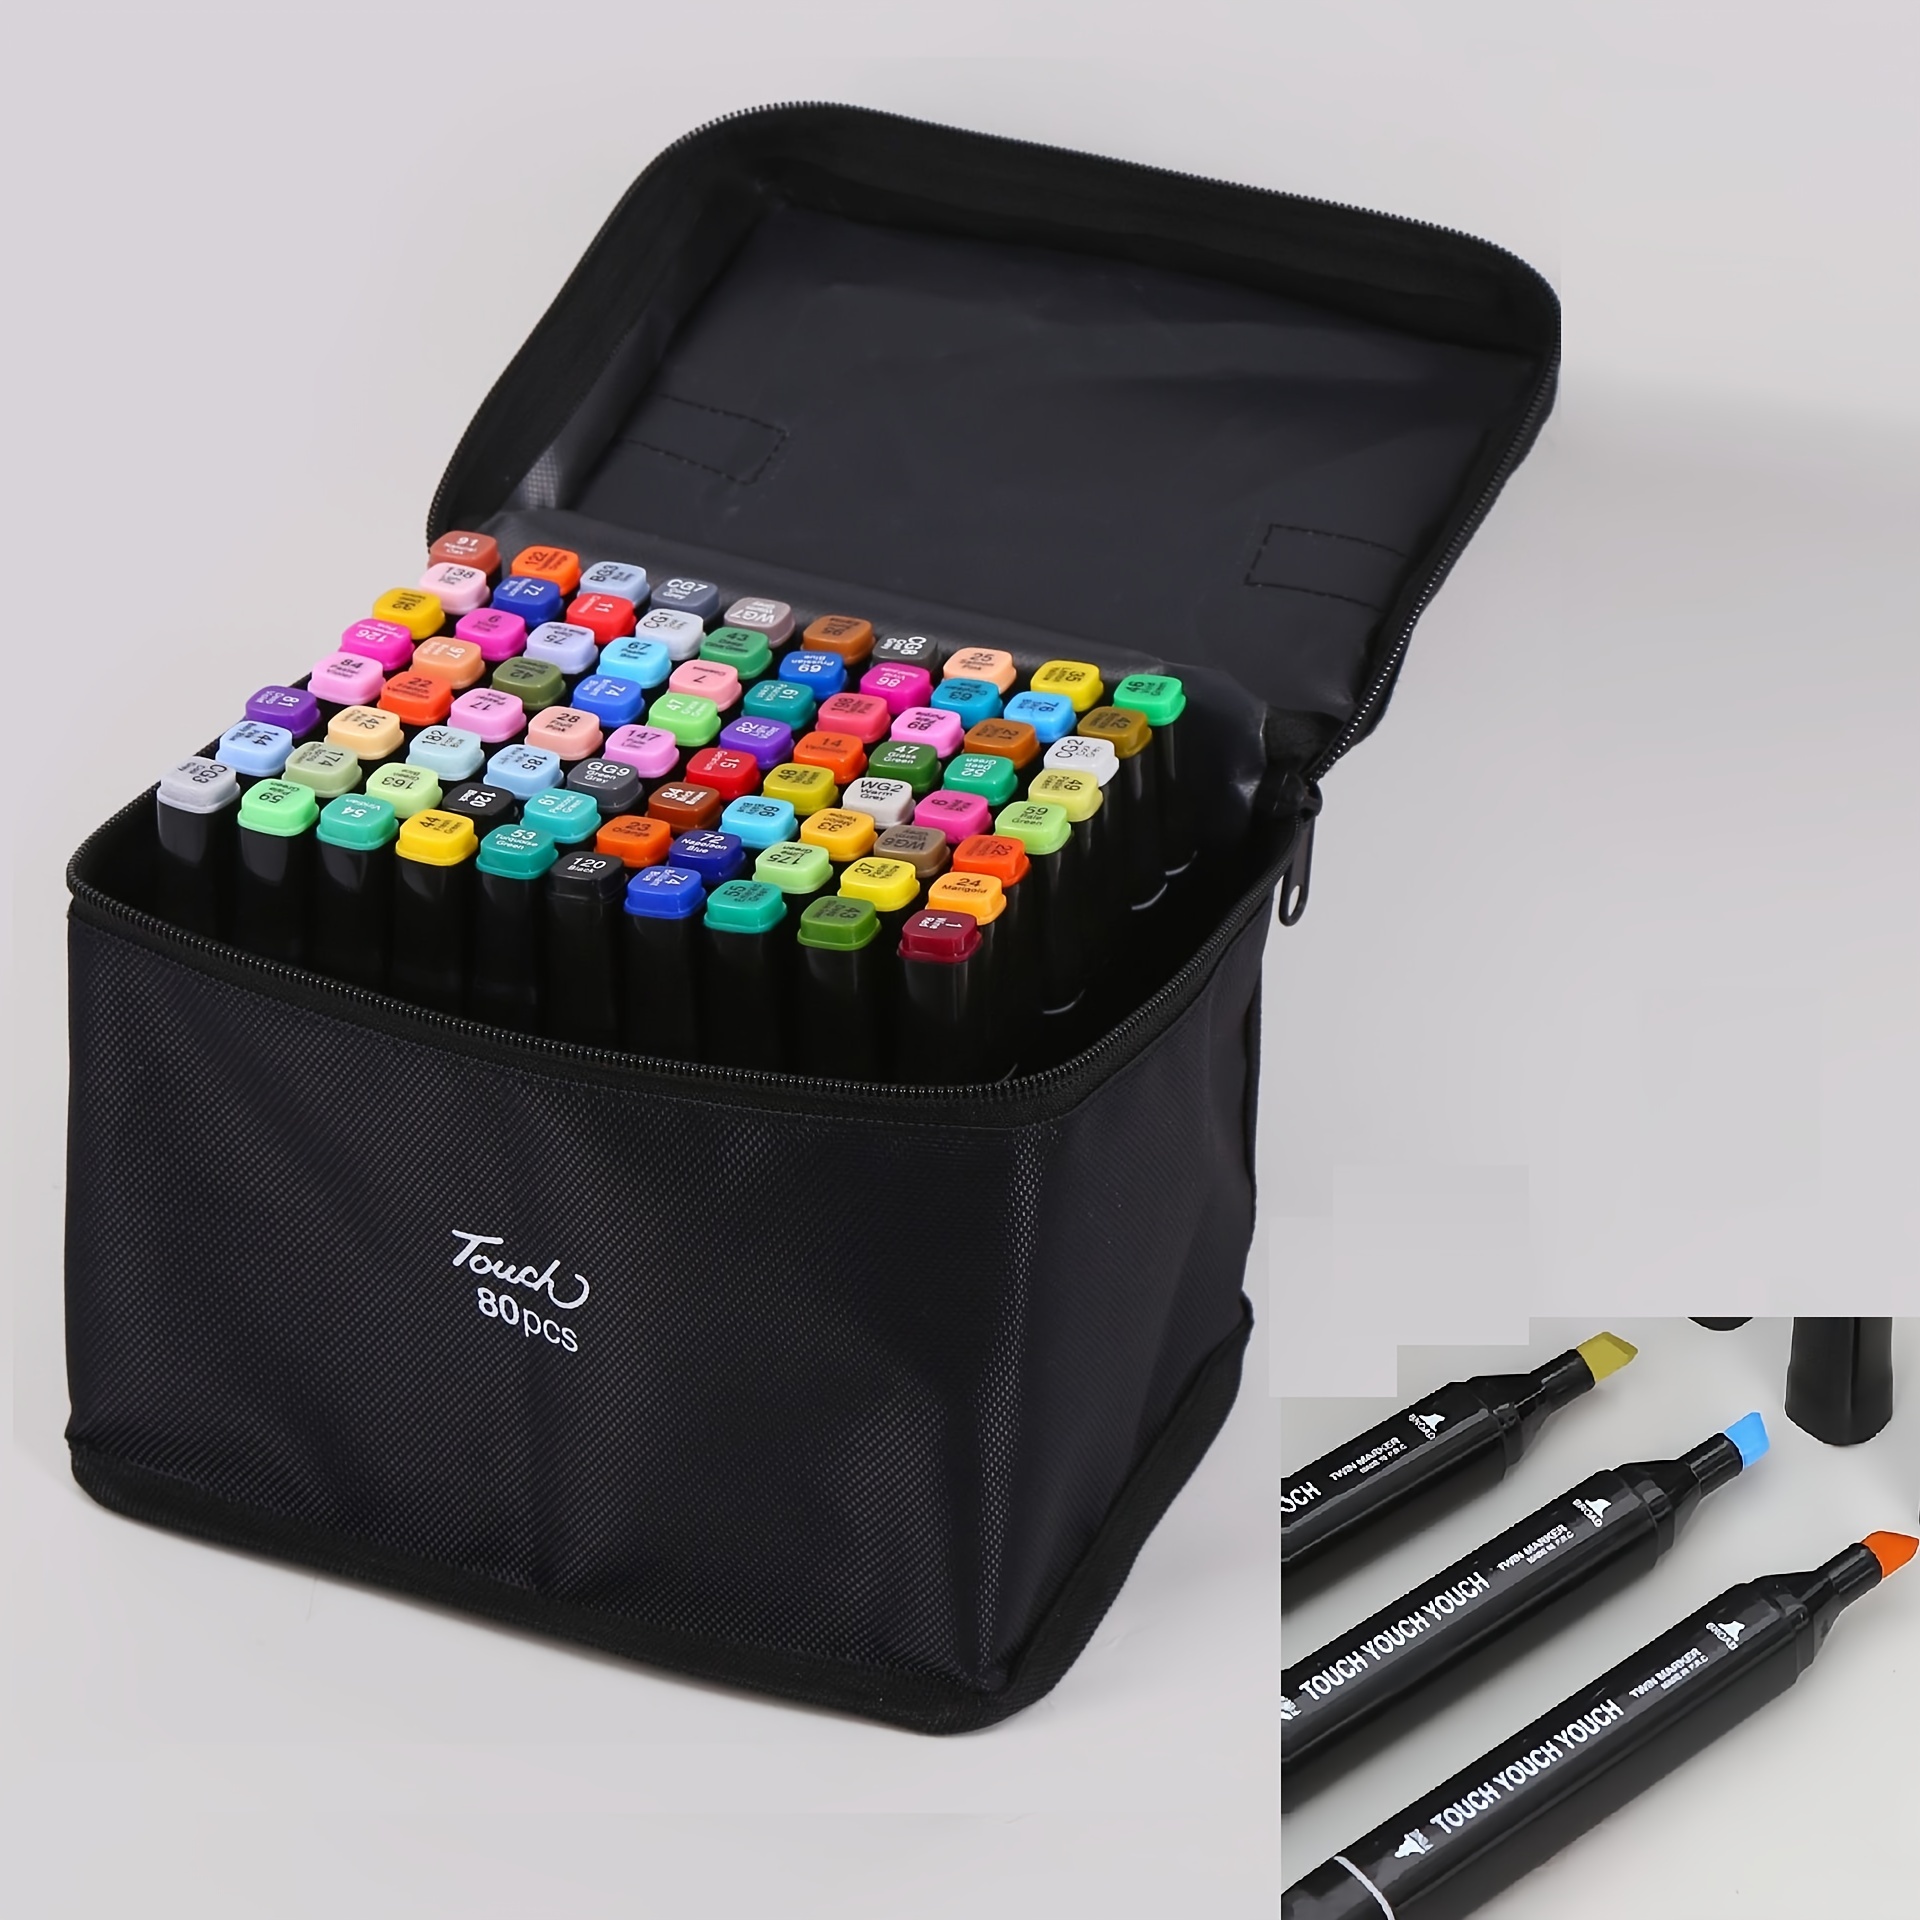 80PCS Marker Pen Set Dual Heads Graphic Artist Craft Sketch TOUCH Markers